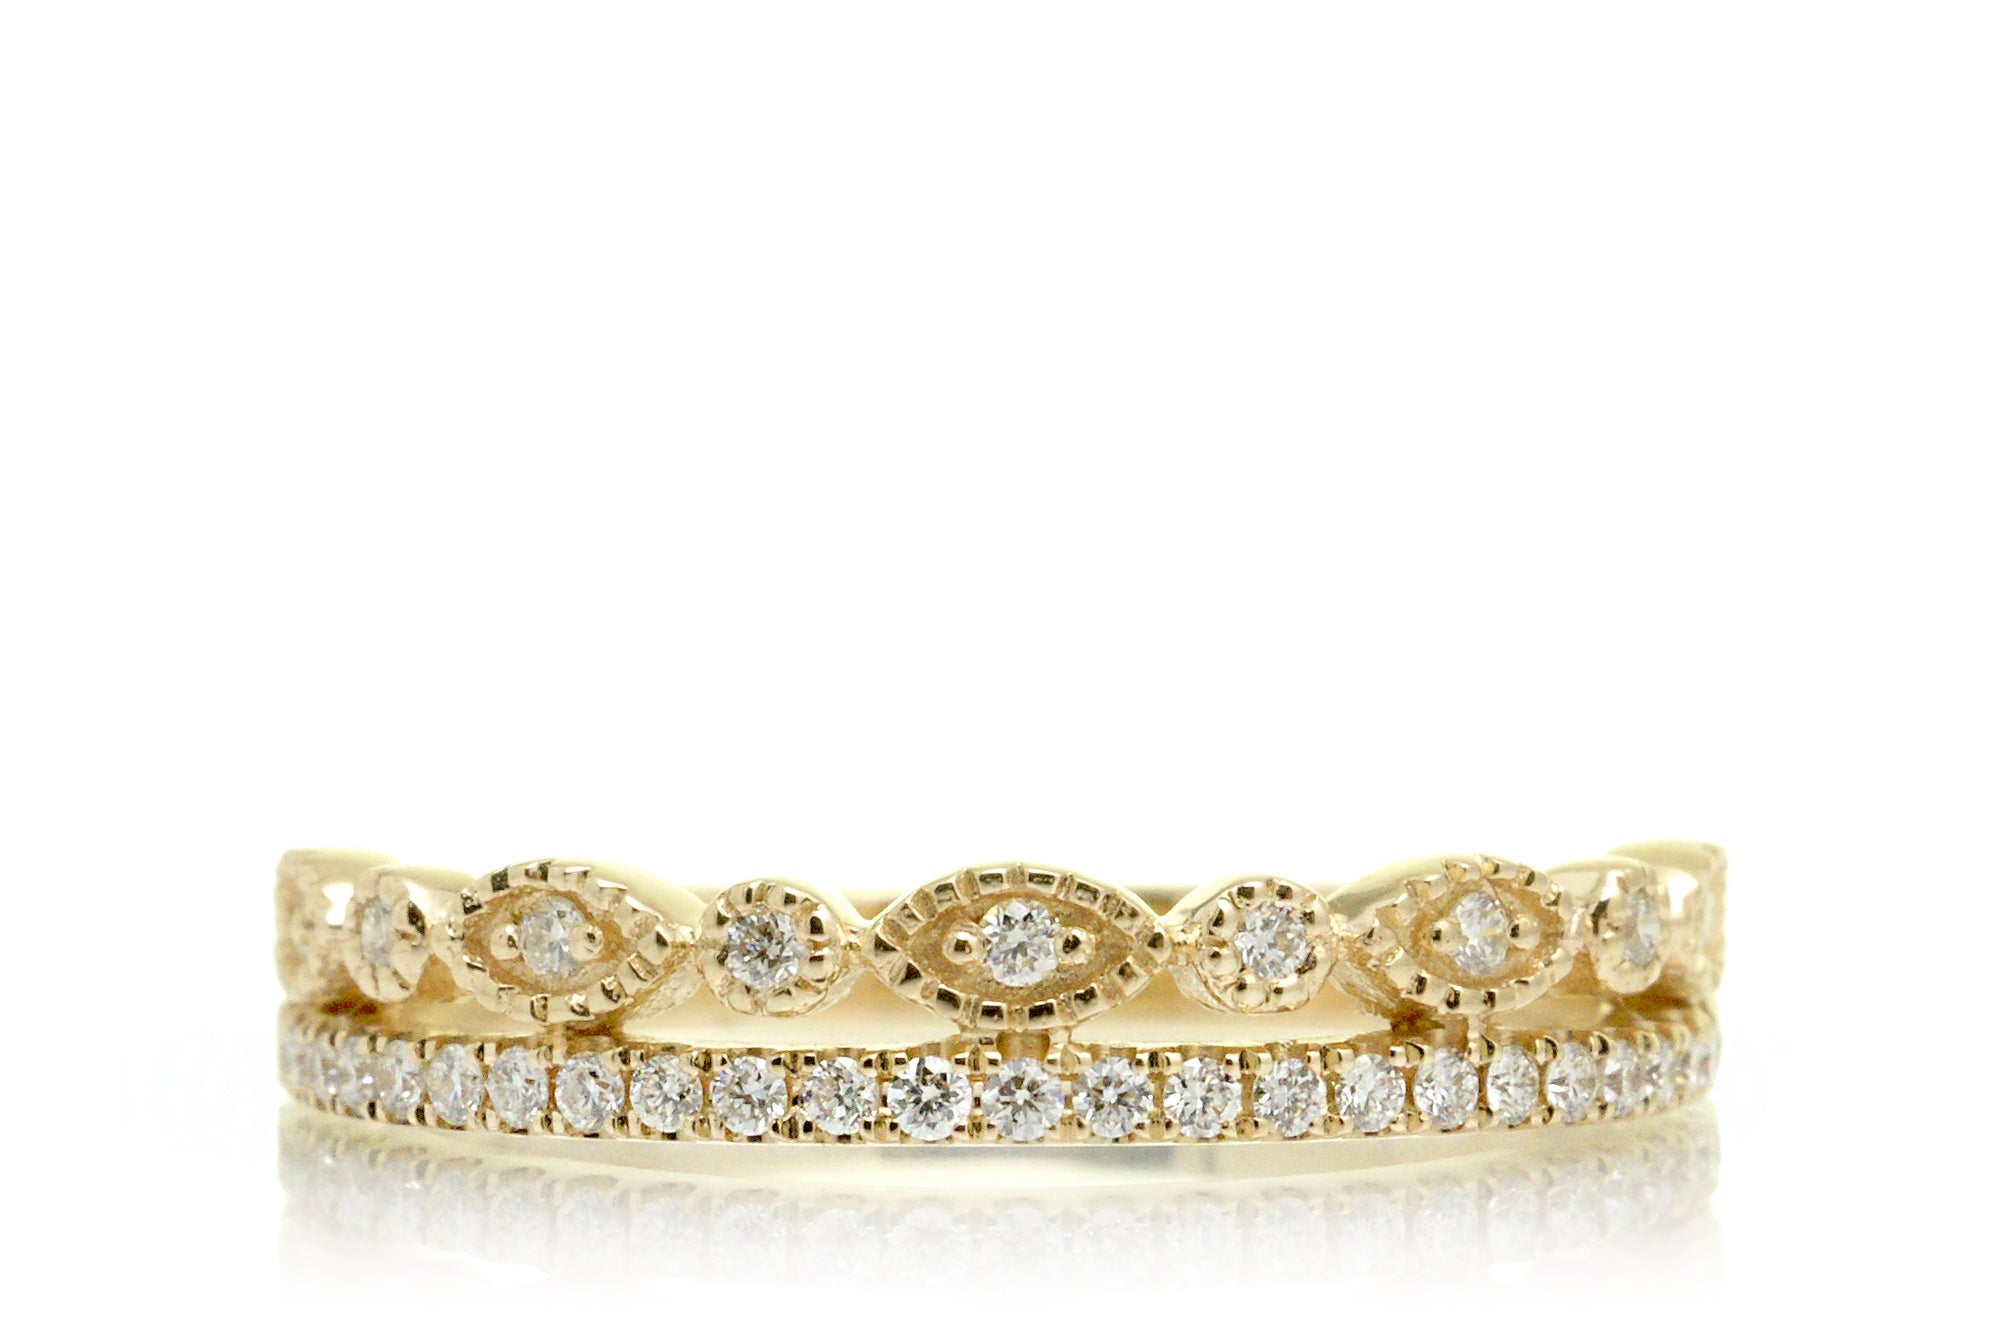 The Double Stack Delilah Diamond Band